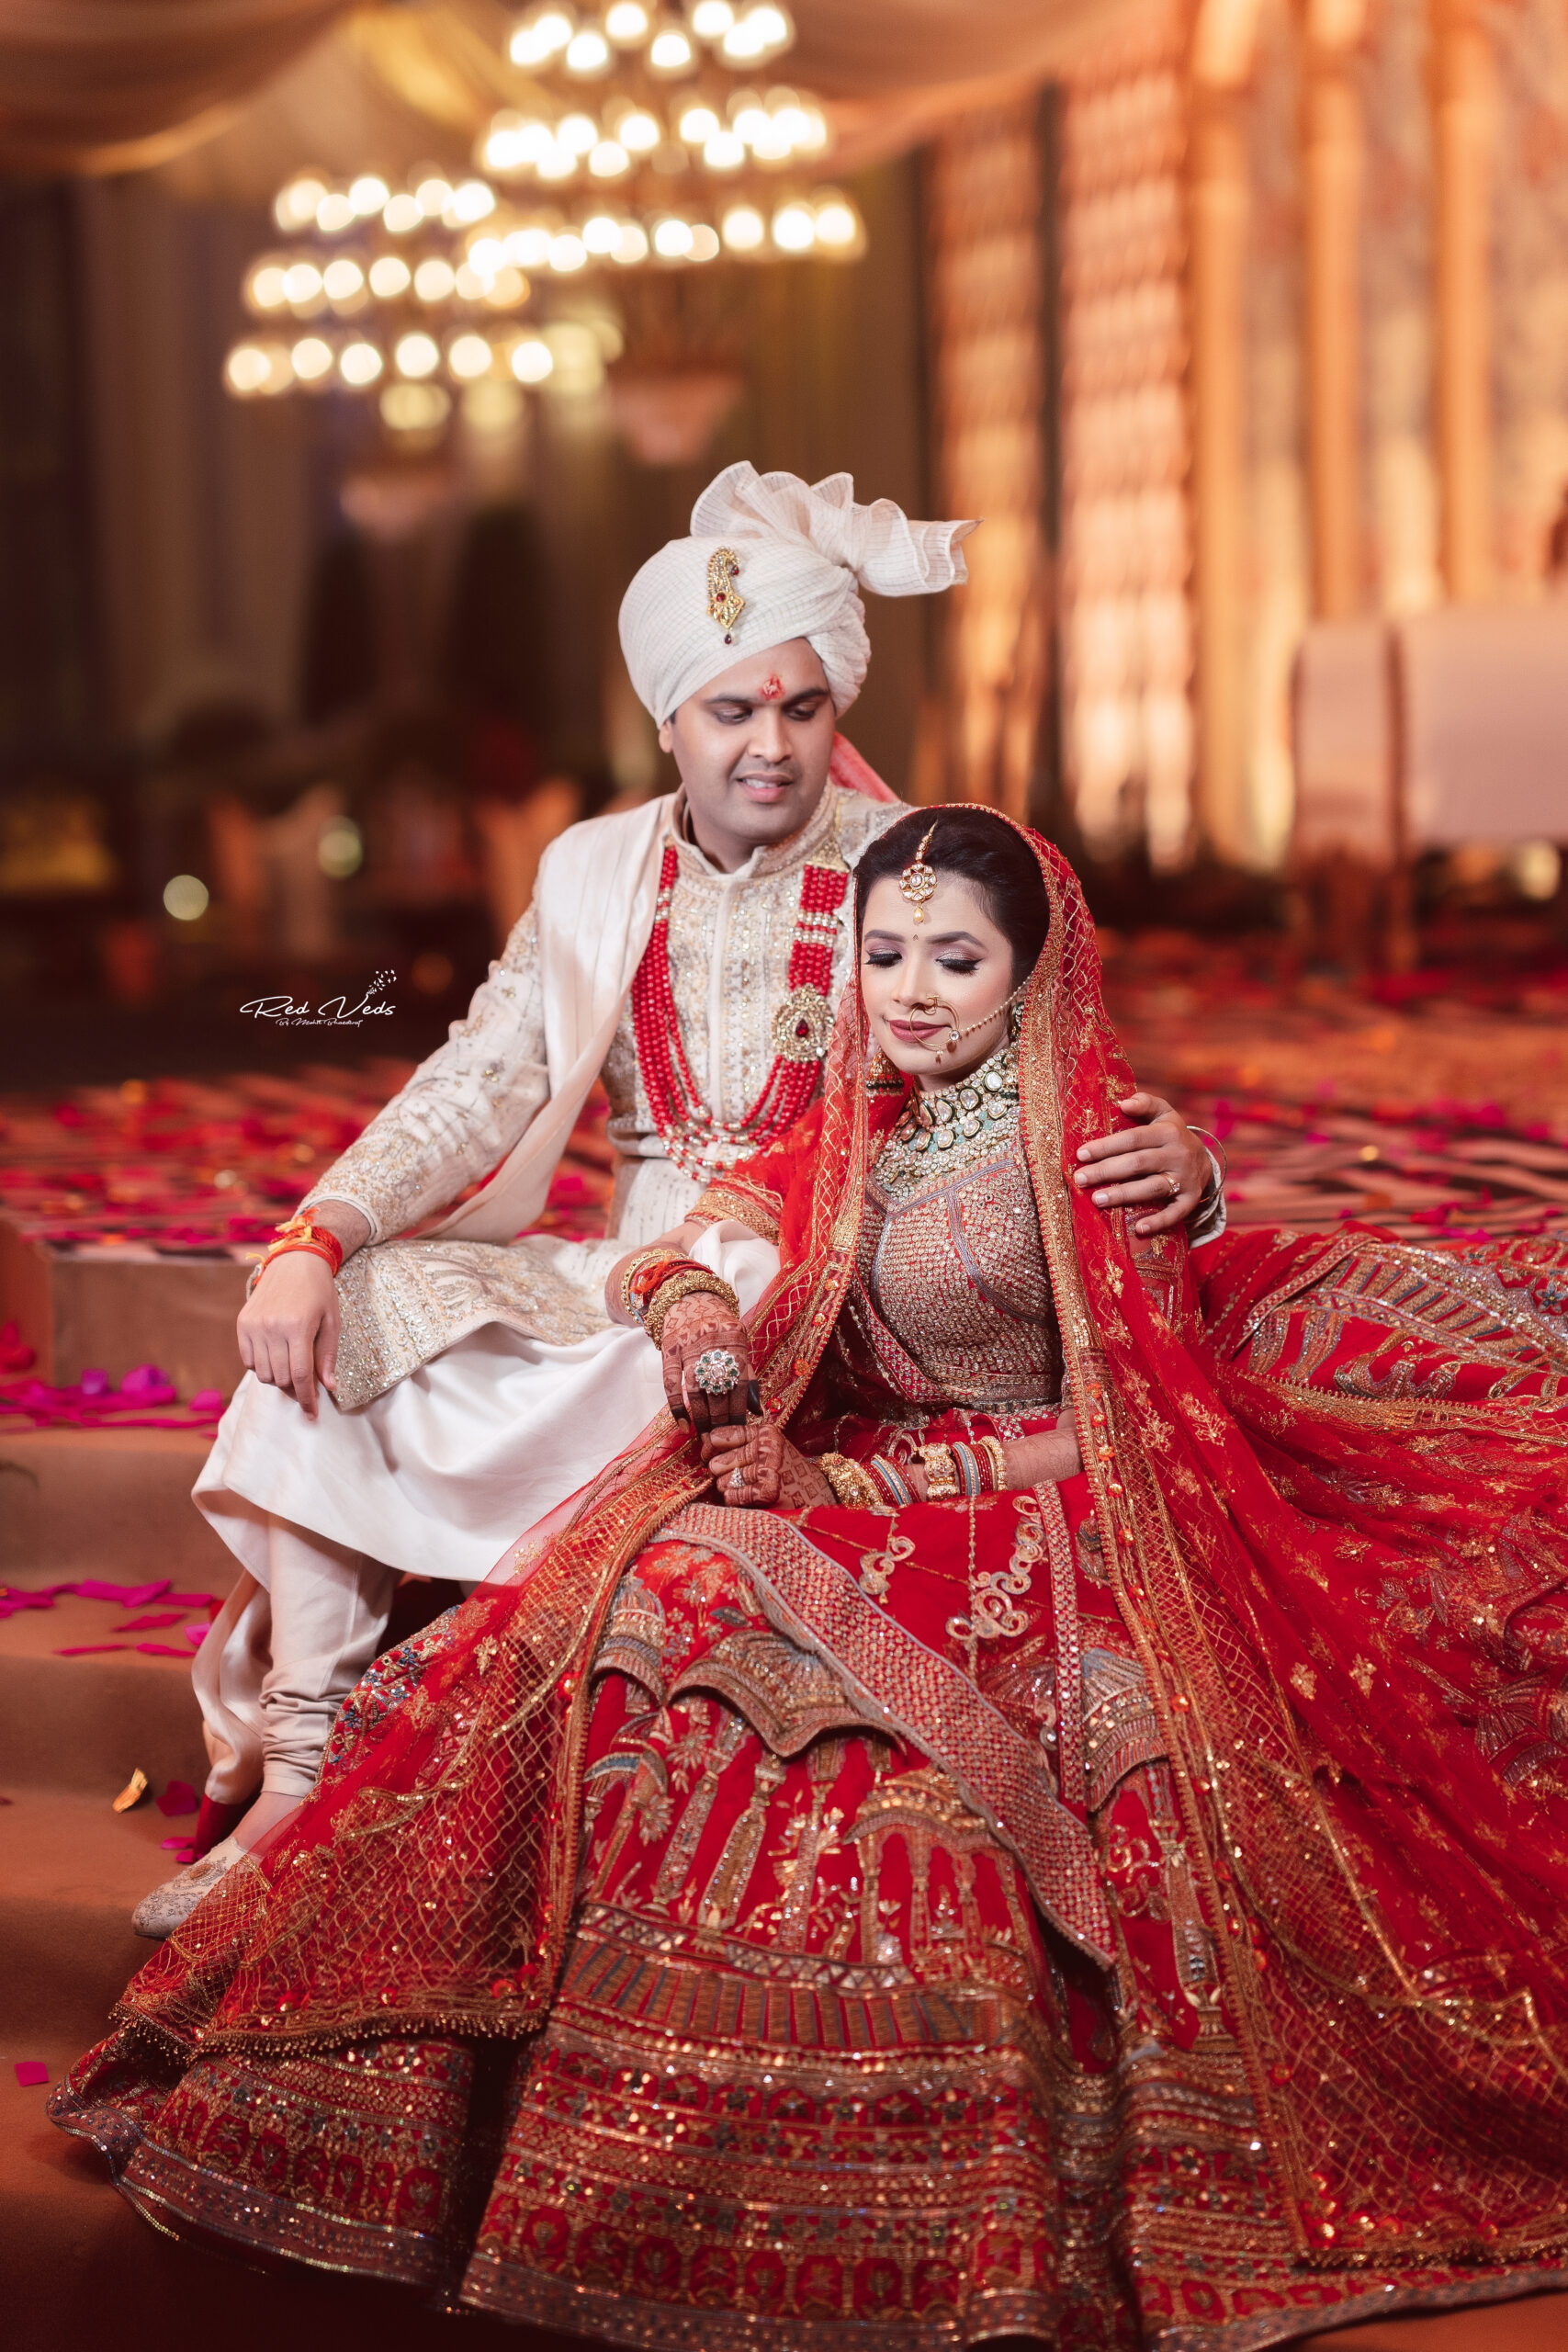 South Indian Couple Portraits That You Must Take Inspiration From!